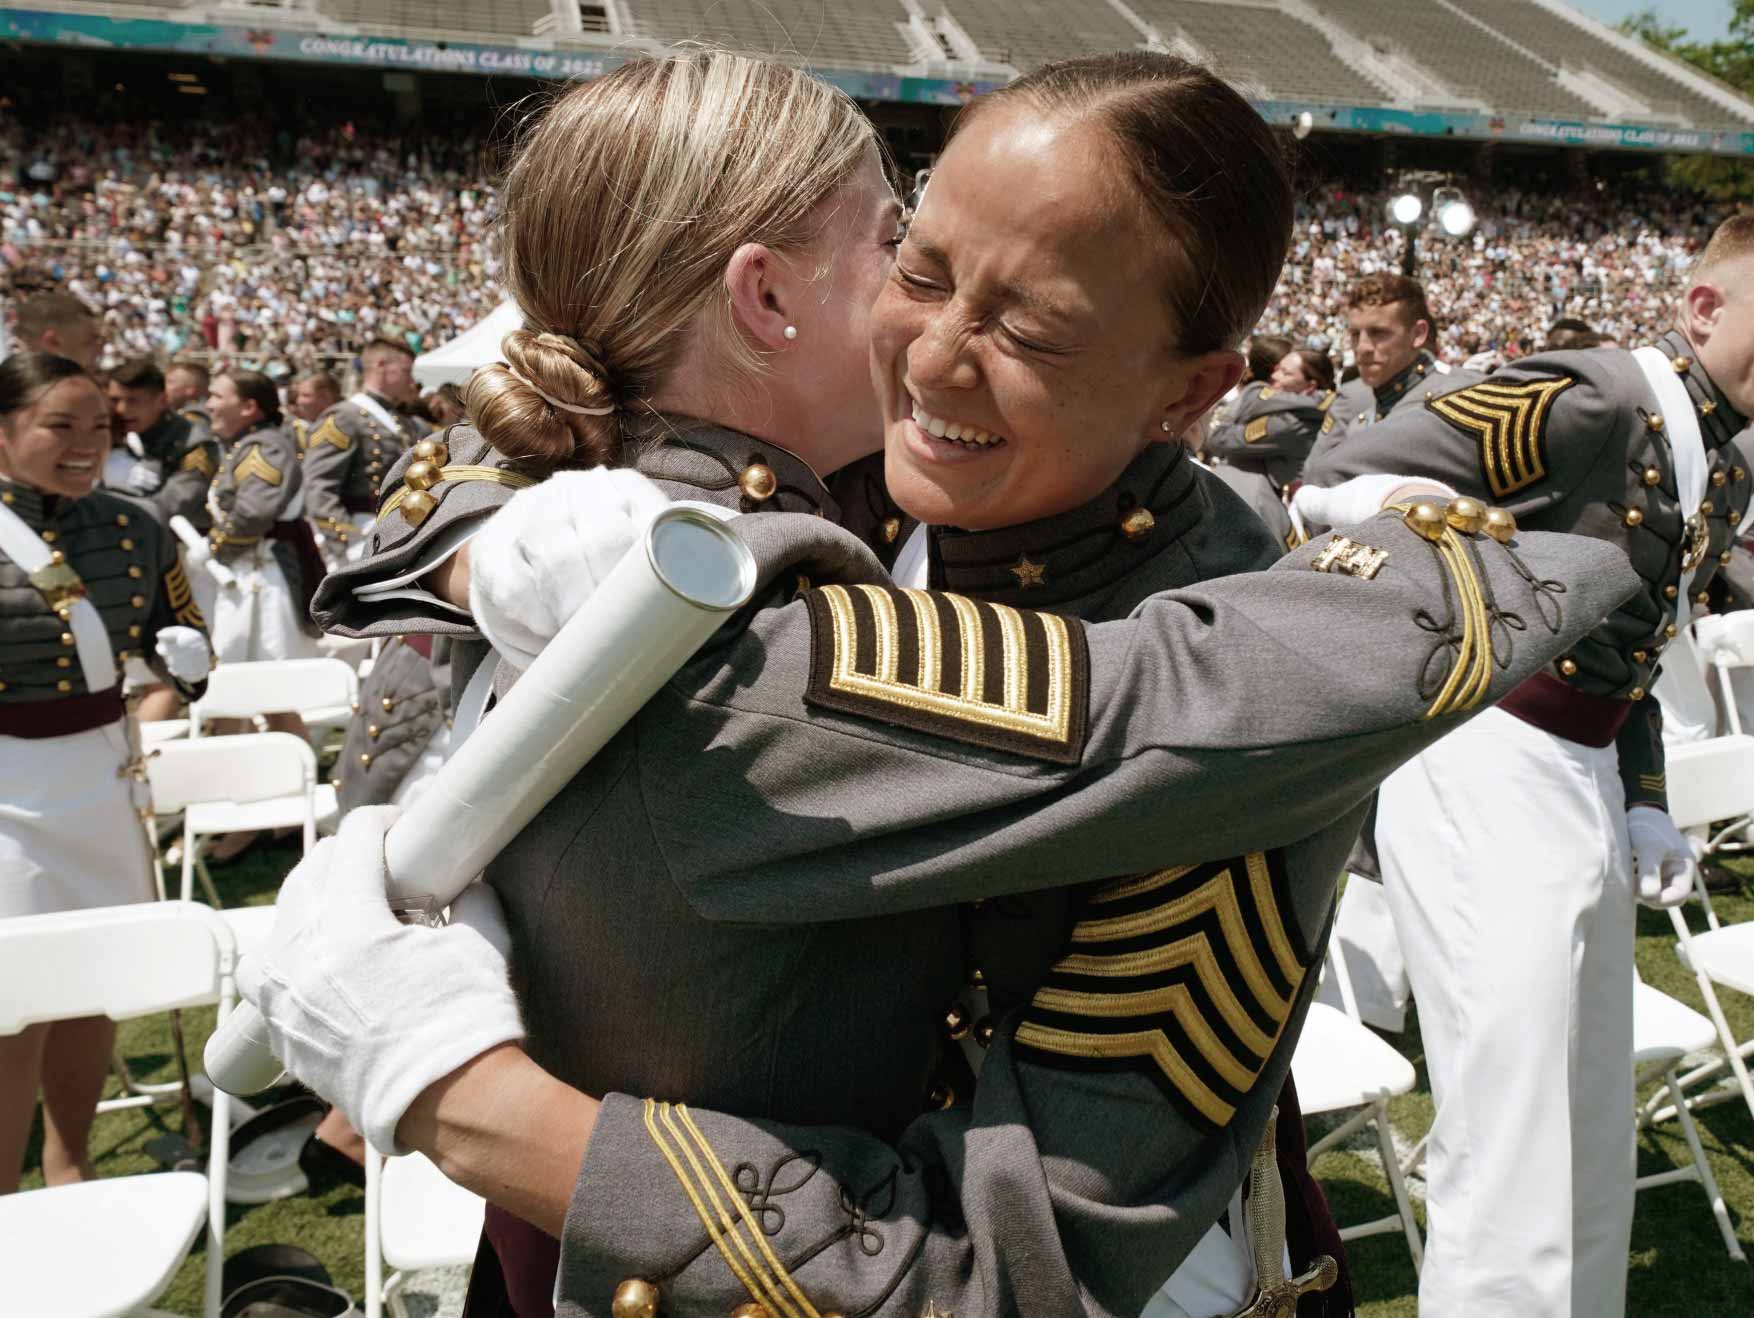 U.S. Military Academy at West Point Cadets celebrating graduation